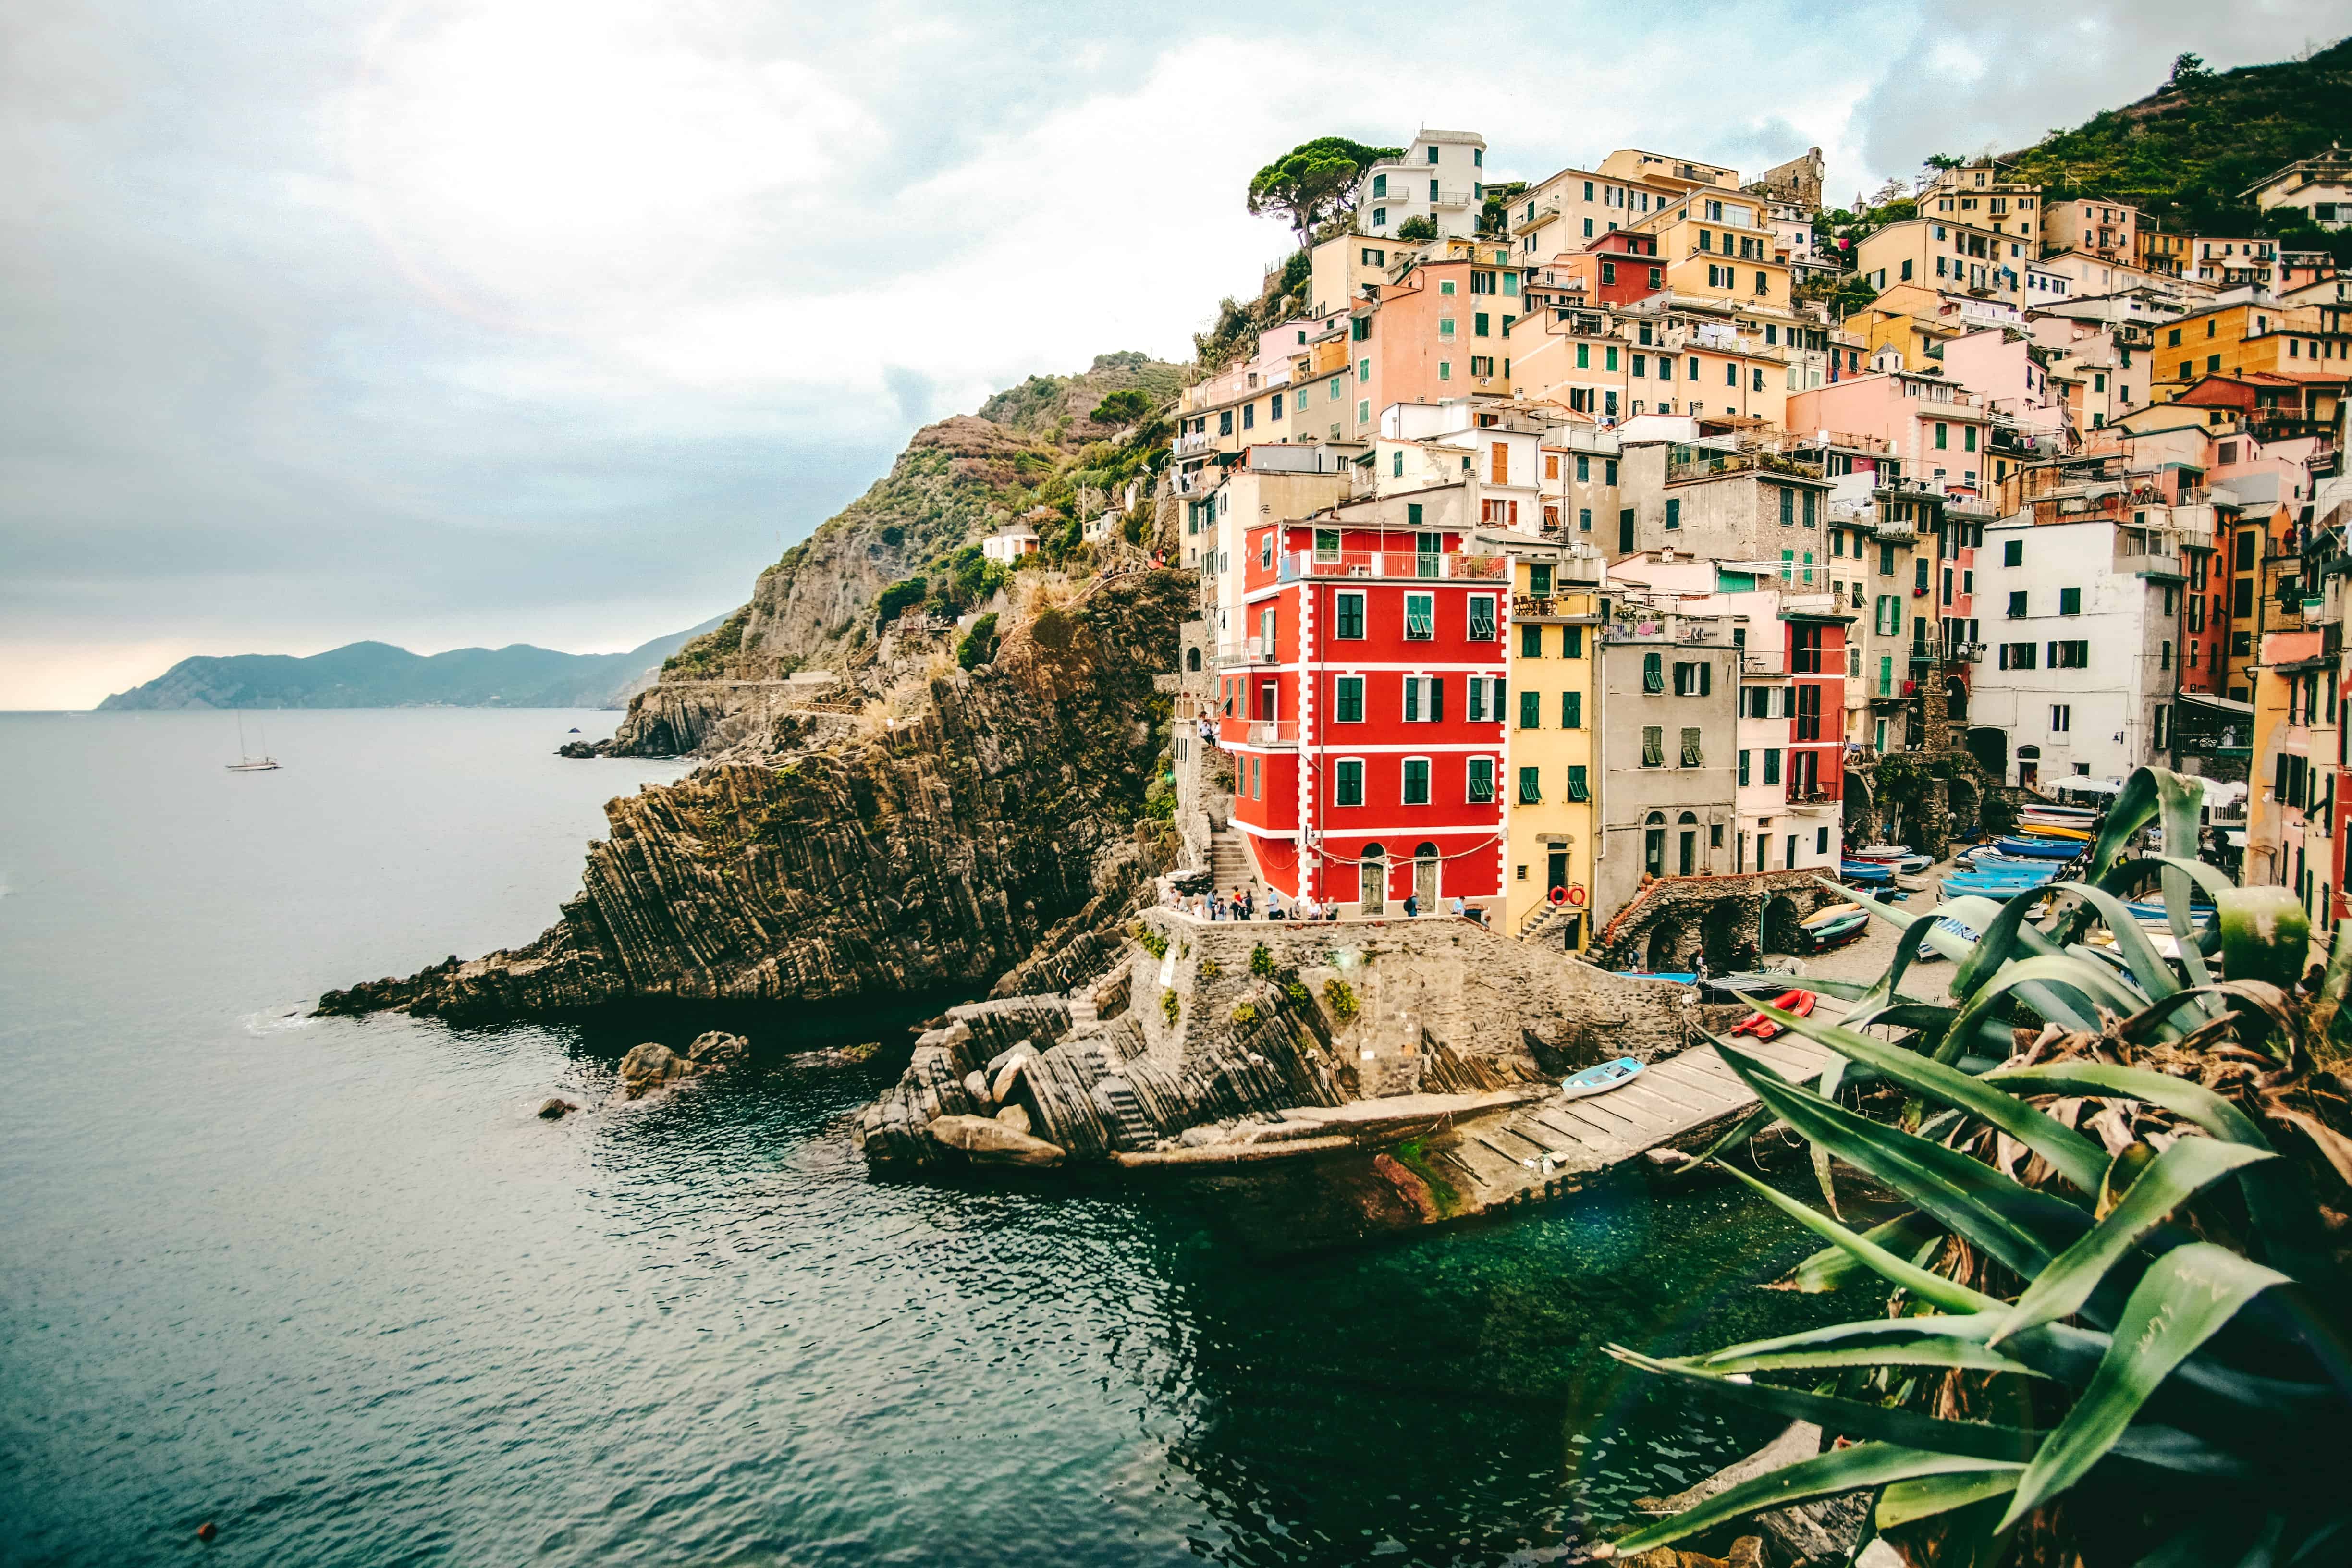 Volunteer Abroad in Italy While Using Your Talents